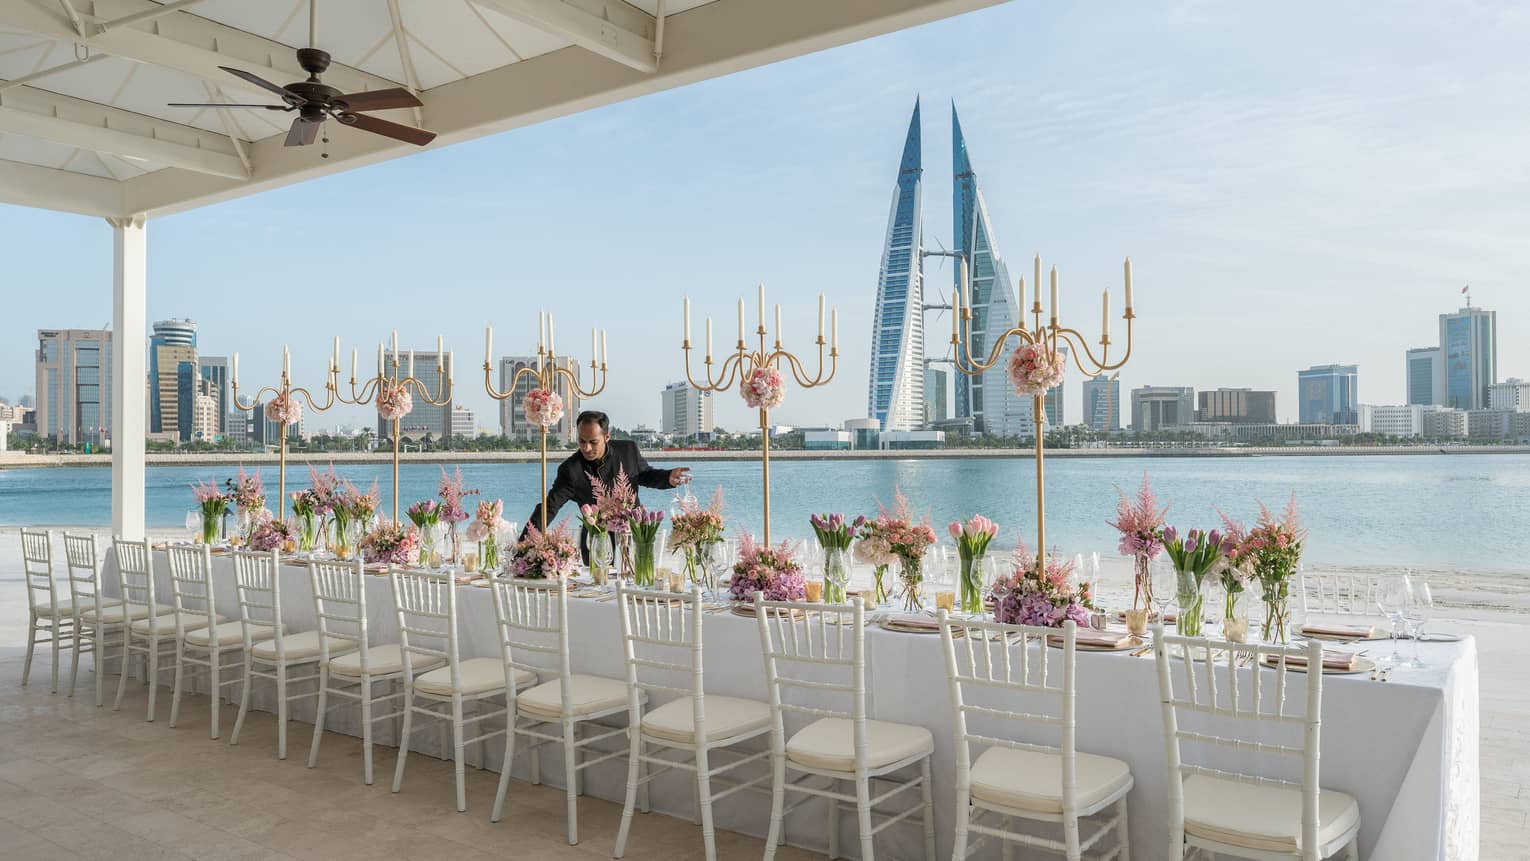 Hotel staff sets long wedding dining table by waterfront, city skyline in background